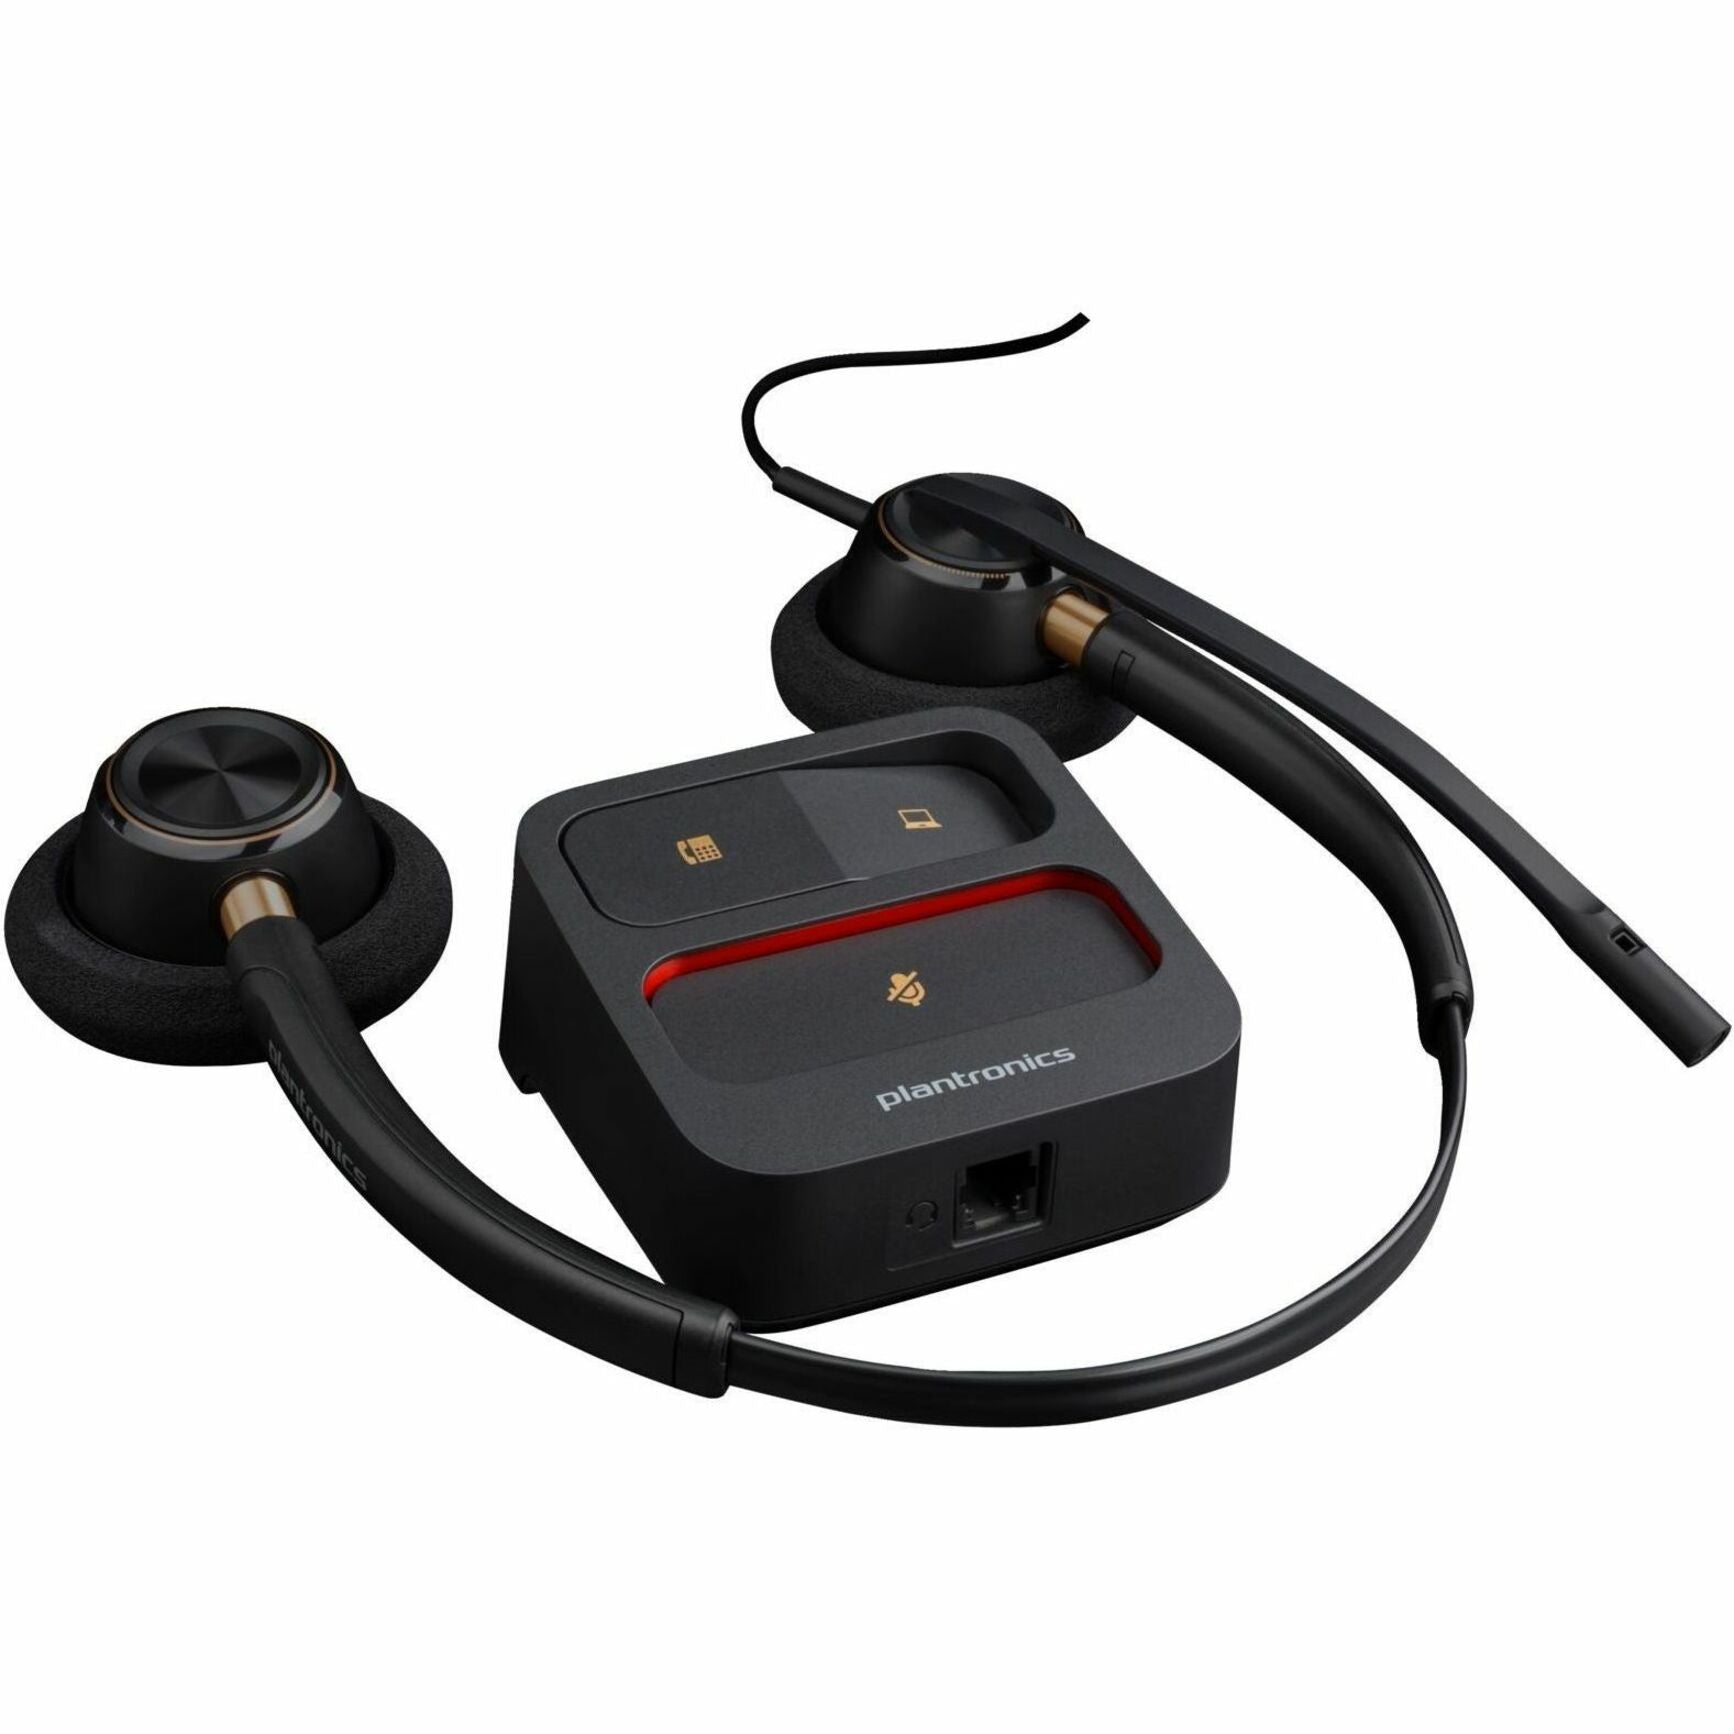 Poly EncorePro 520 Binaural Headset TAA, Noise Cancelling, PC/Mac Compatible